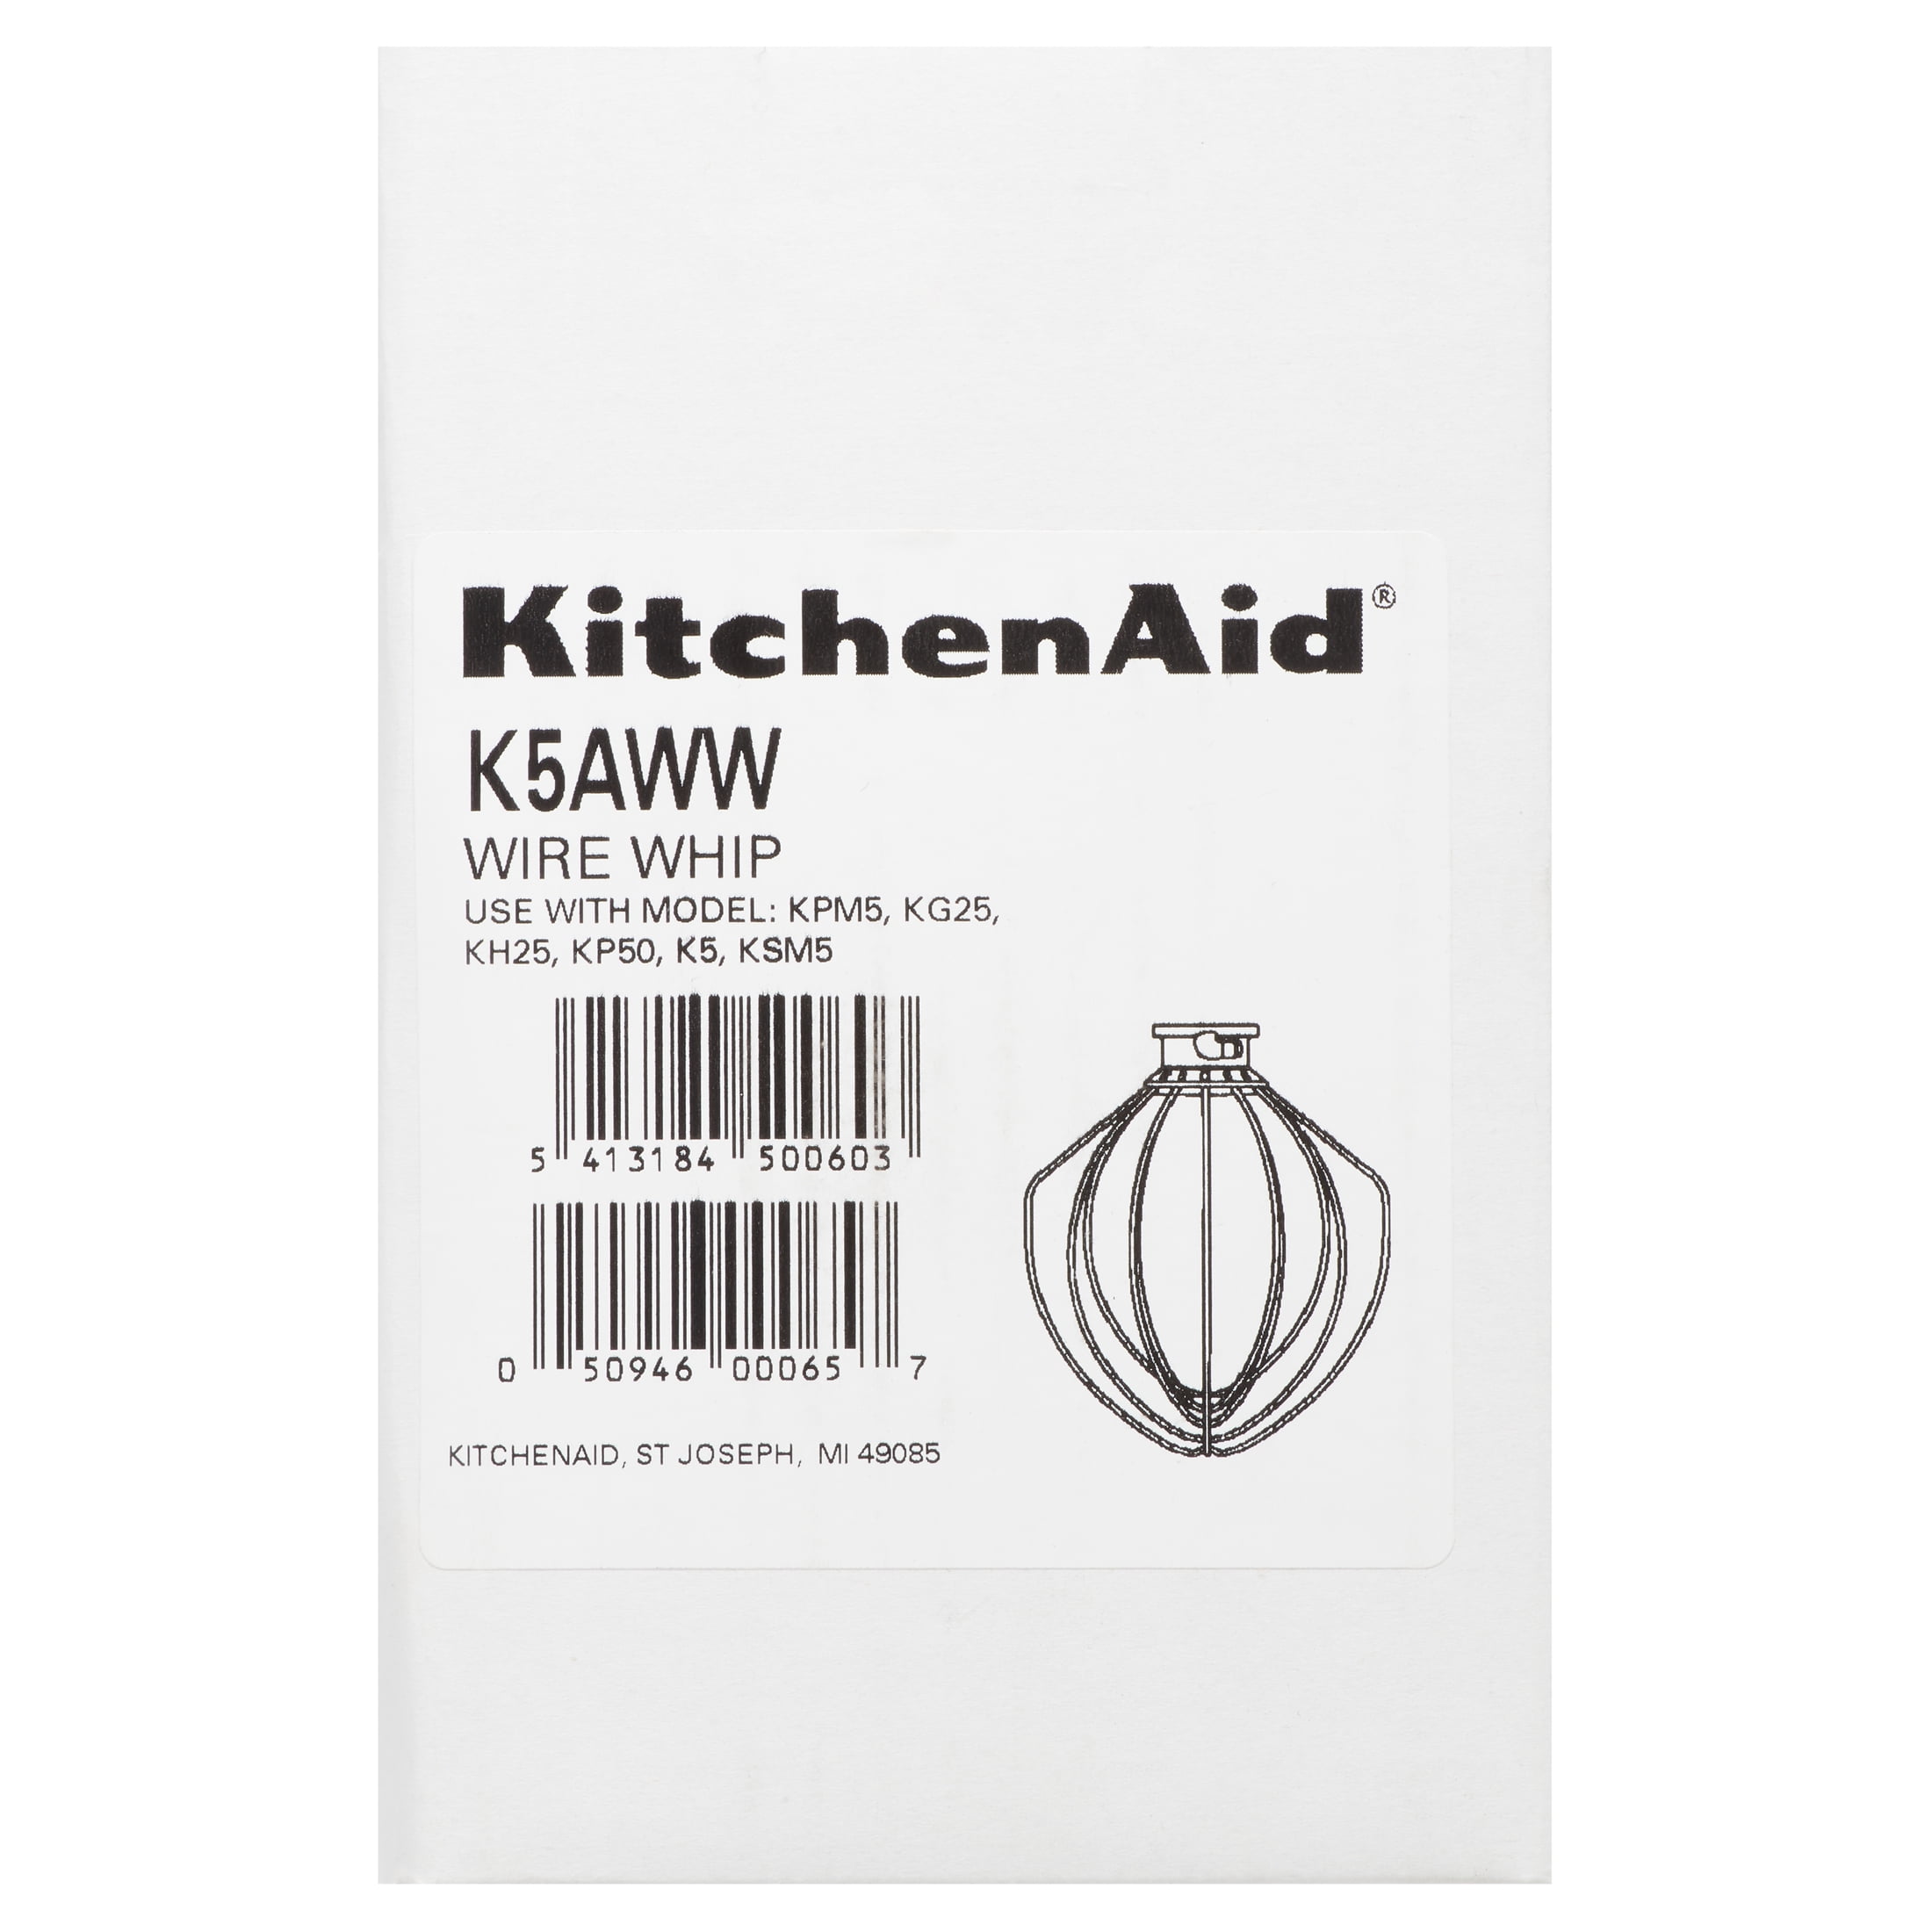 KitchenAid 6 Wire Whip (for 5 QT Bowl-Lift Stand Mixer) - Spoons N Spice